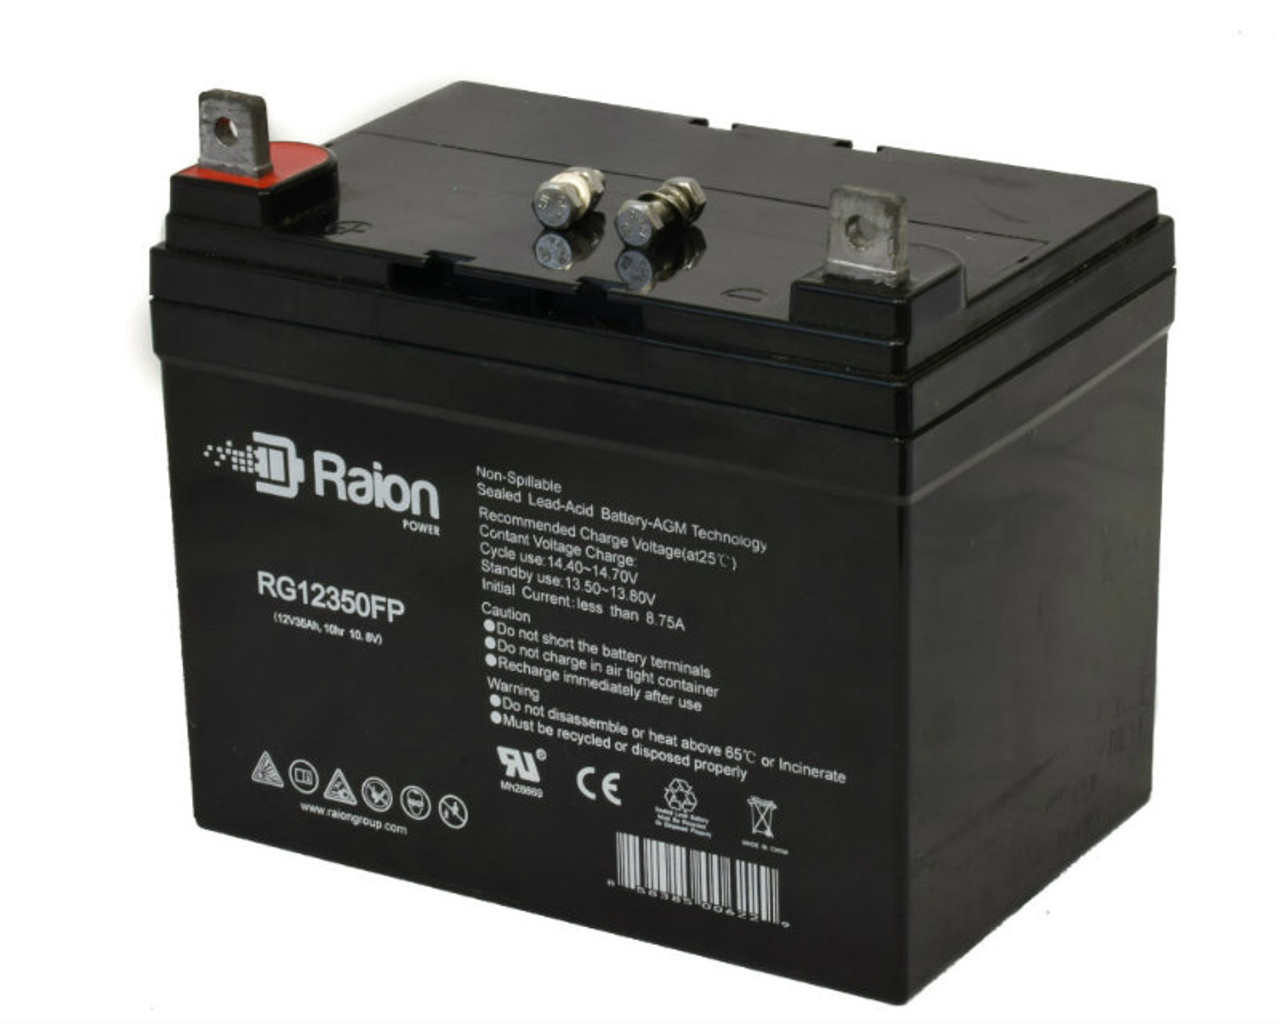 Raion Power Replacement 12V 35Ah RG12350FP Battery for J.I. Case & Case IH 80